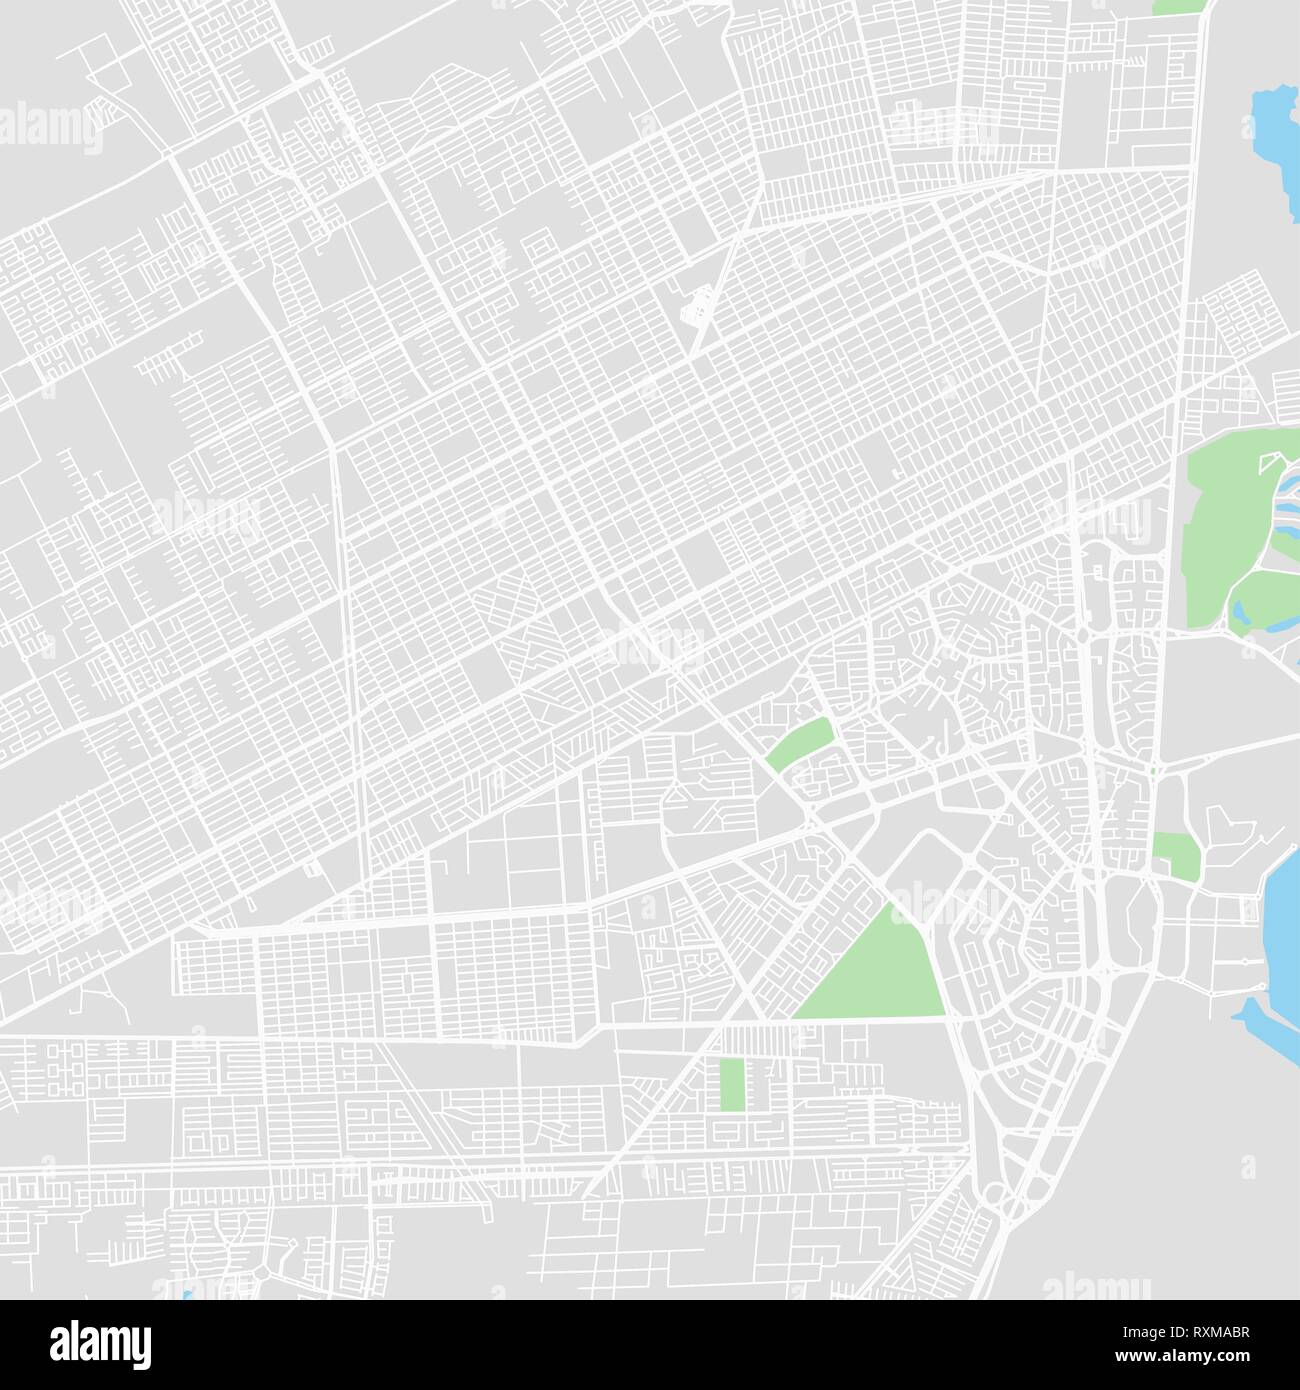 Downtown vector map of Cancún, Mexico. This printable map of Cancún contains lines and classic colored shapes for land mass, parks, water, major and m Stock Vector